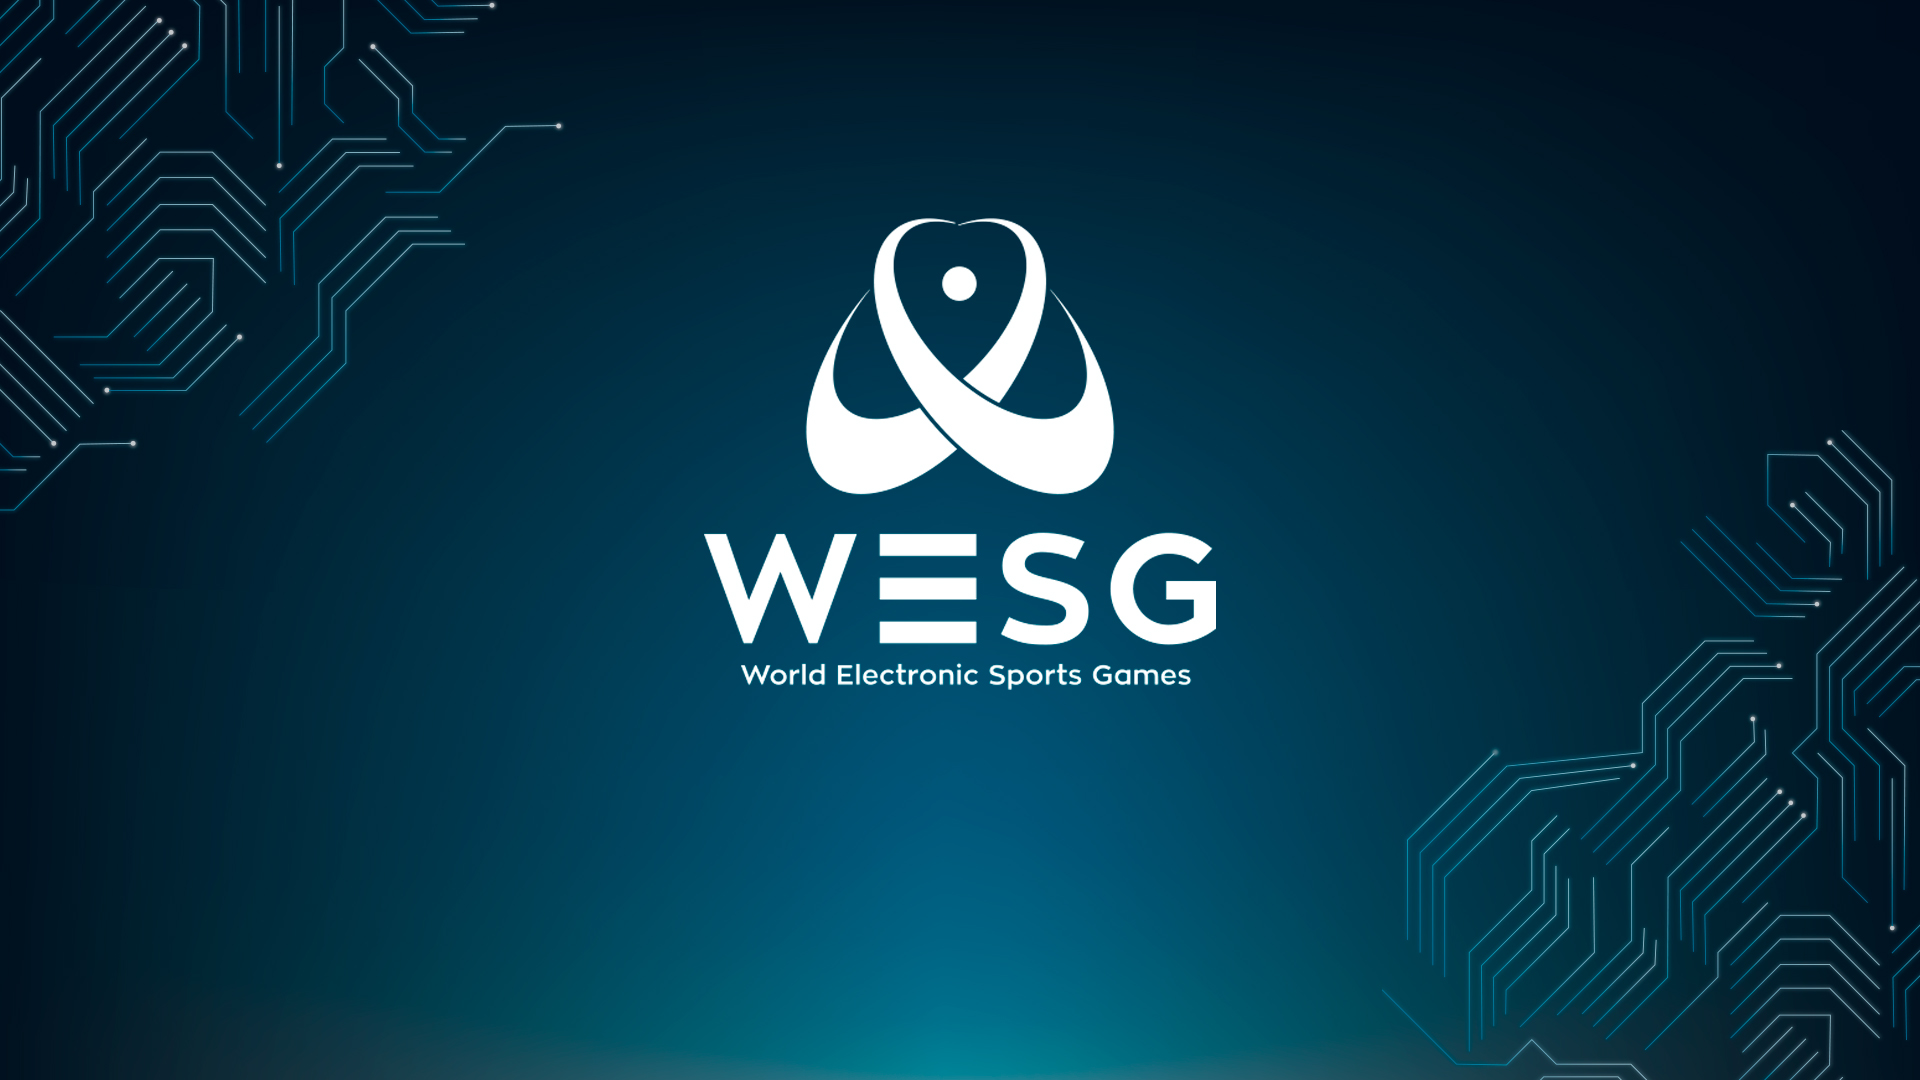 world electronic sports games